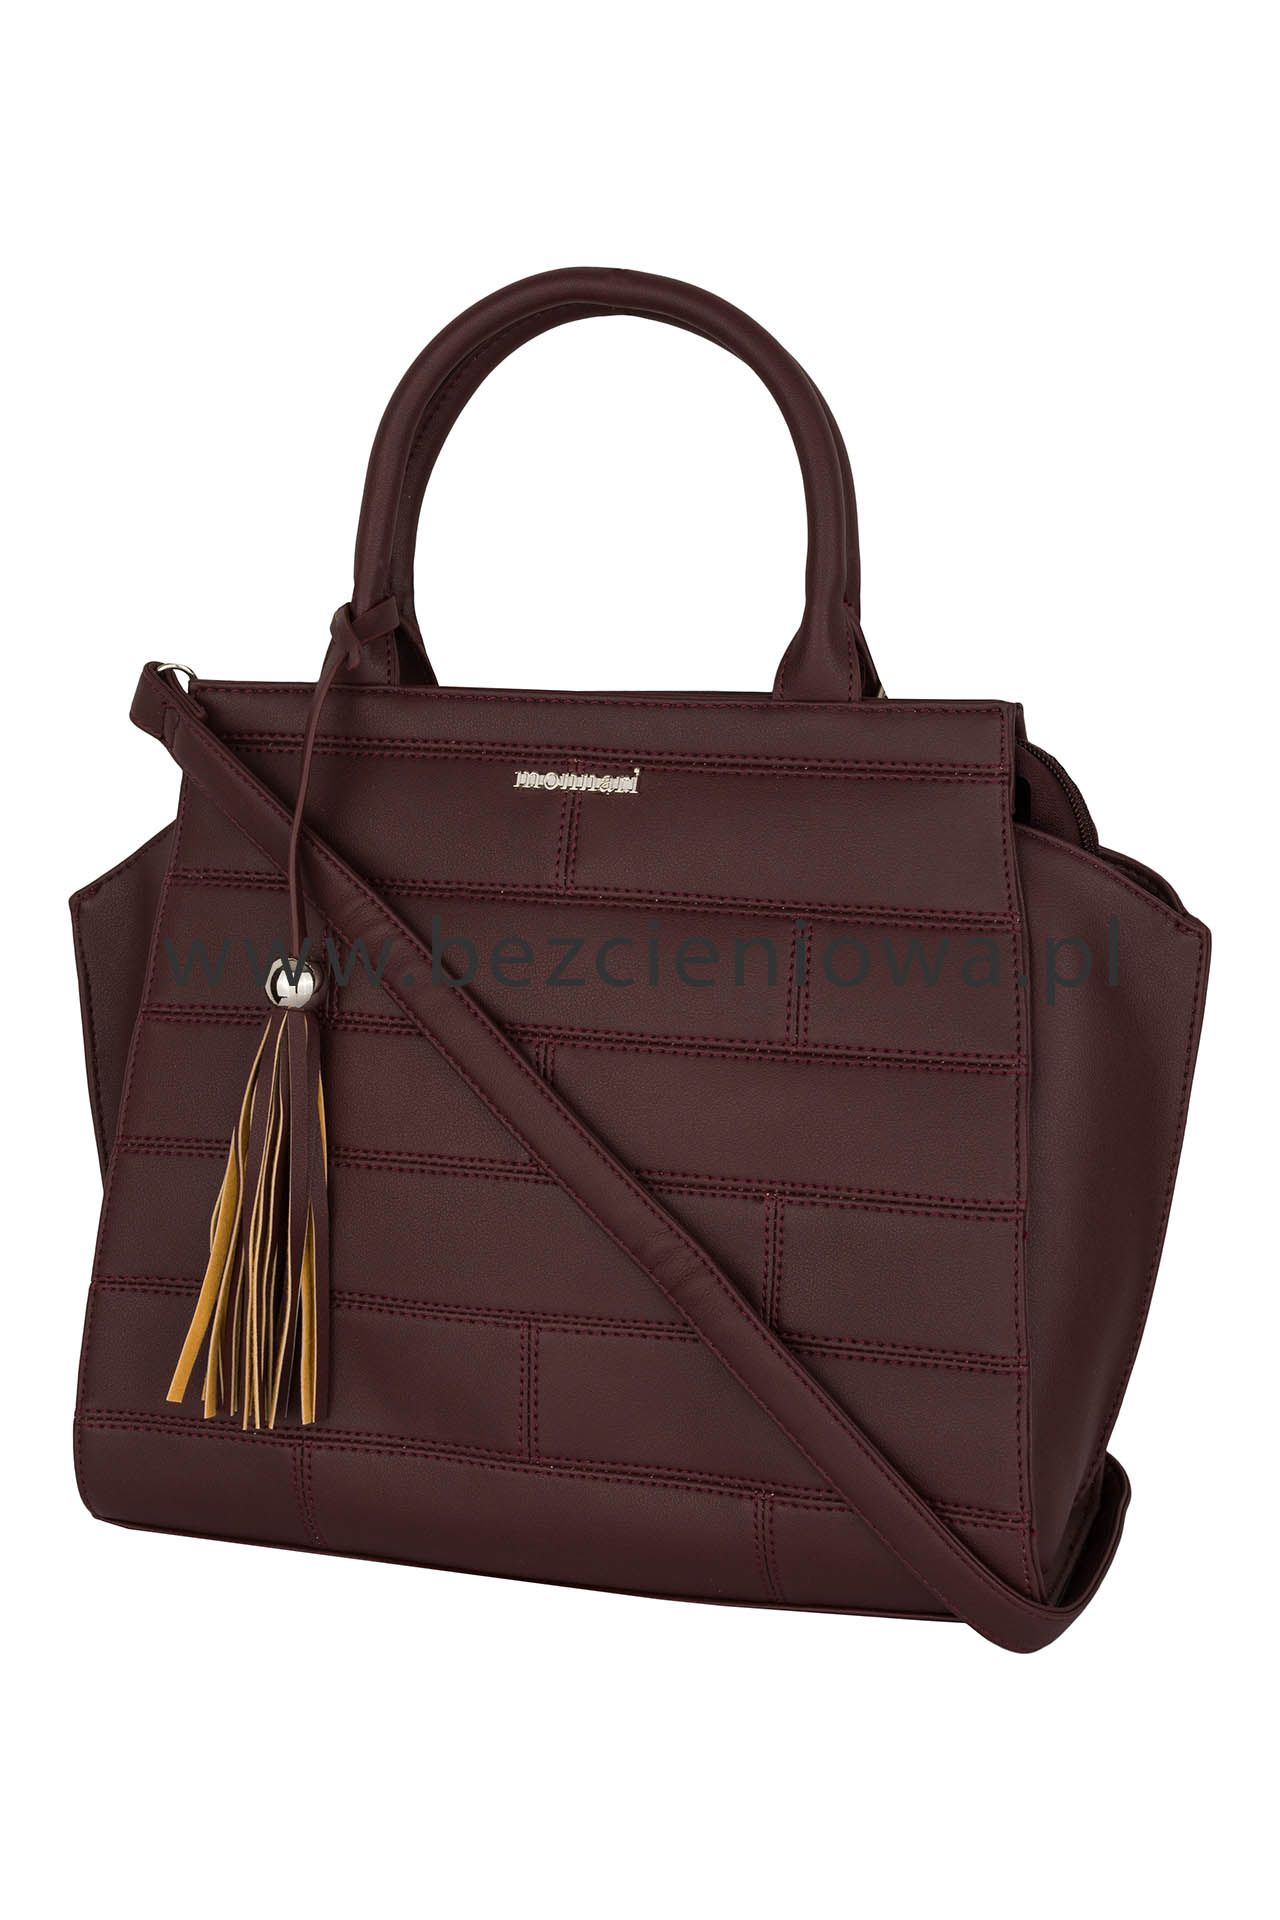 Product photo of the bag - bezcieniowa.pl